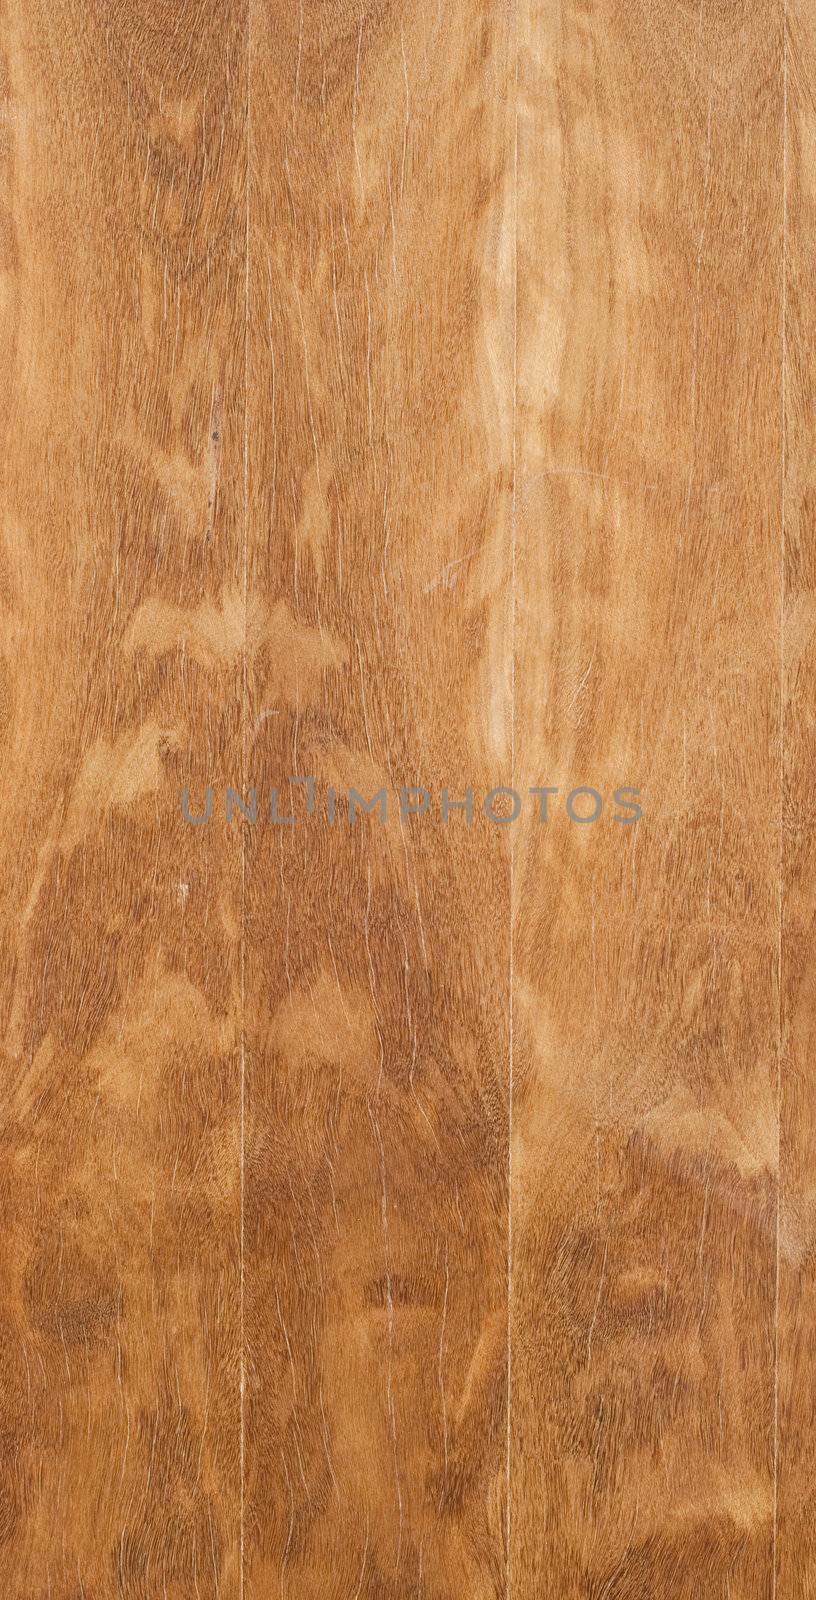 Part of a brown woodboard texture.